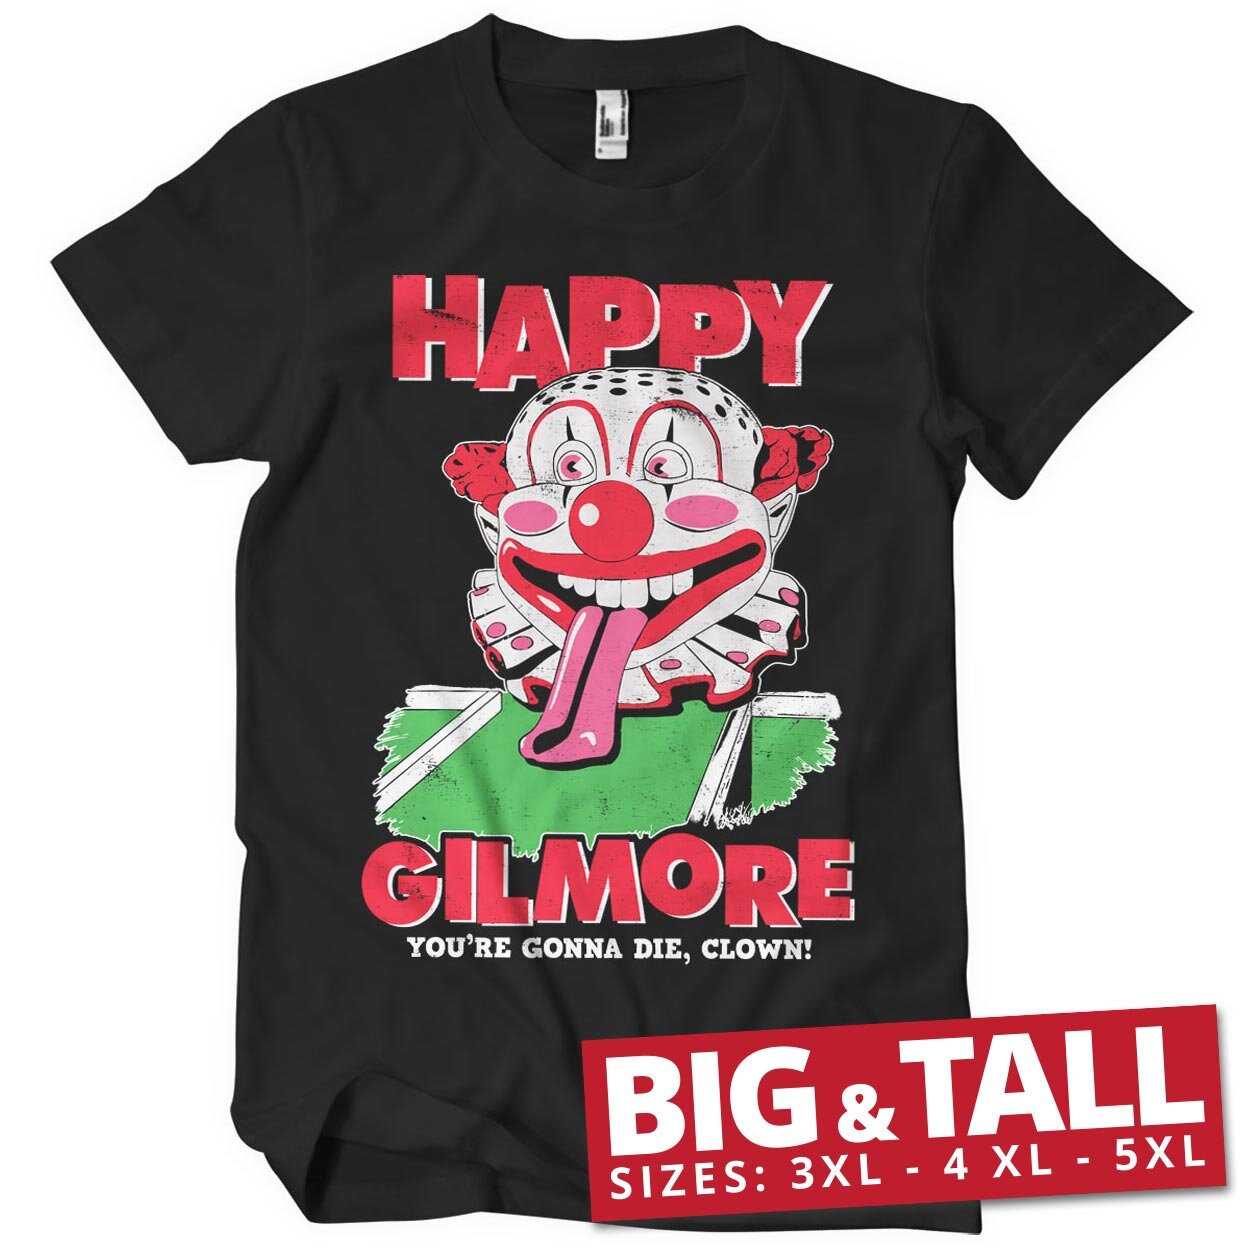 Happy Gilmore - You're Gonna Die Clown Big & Tall T-Shirt